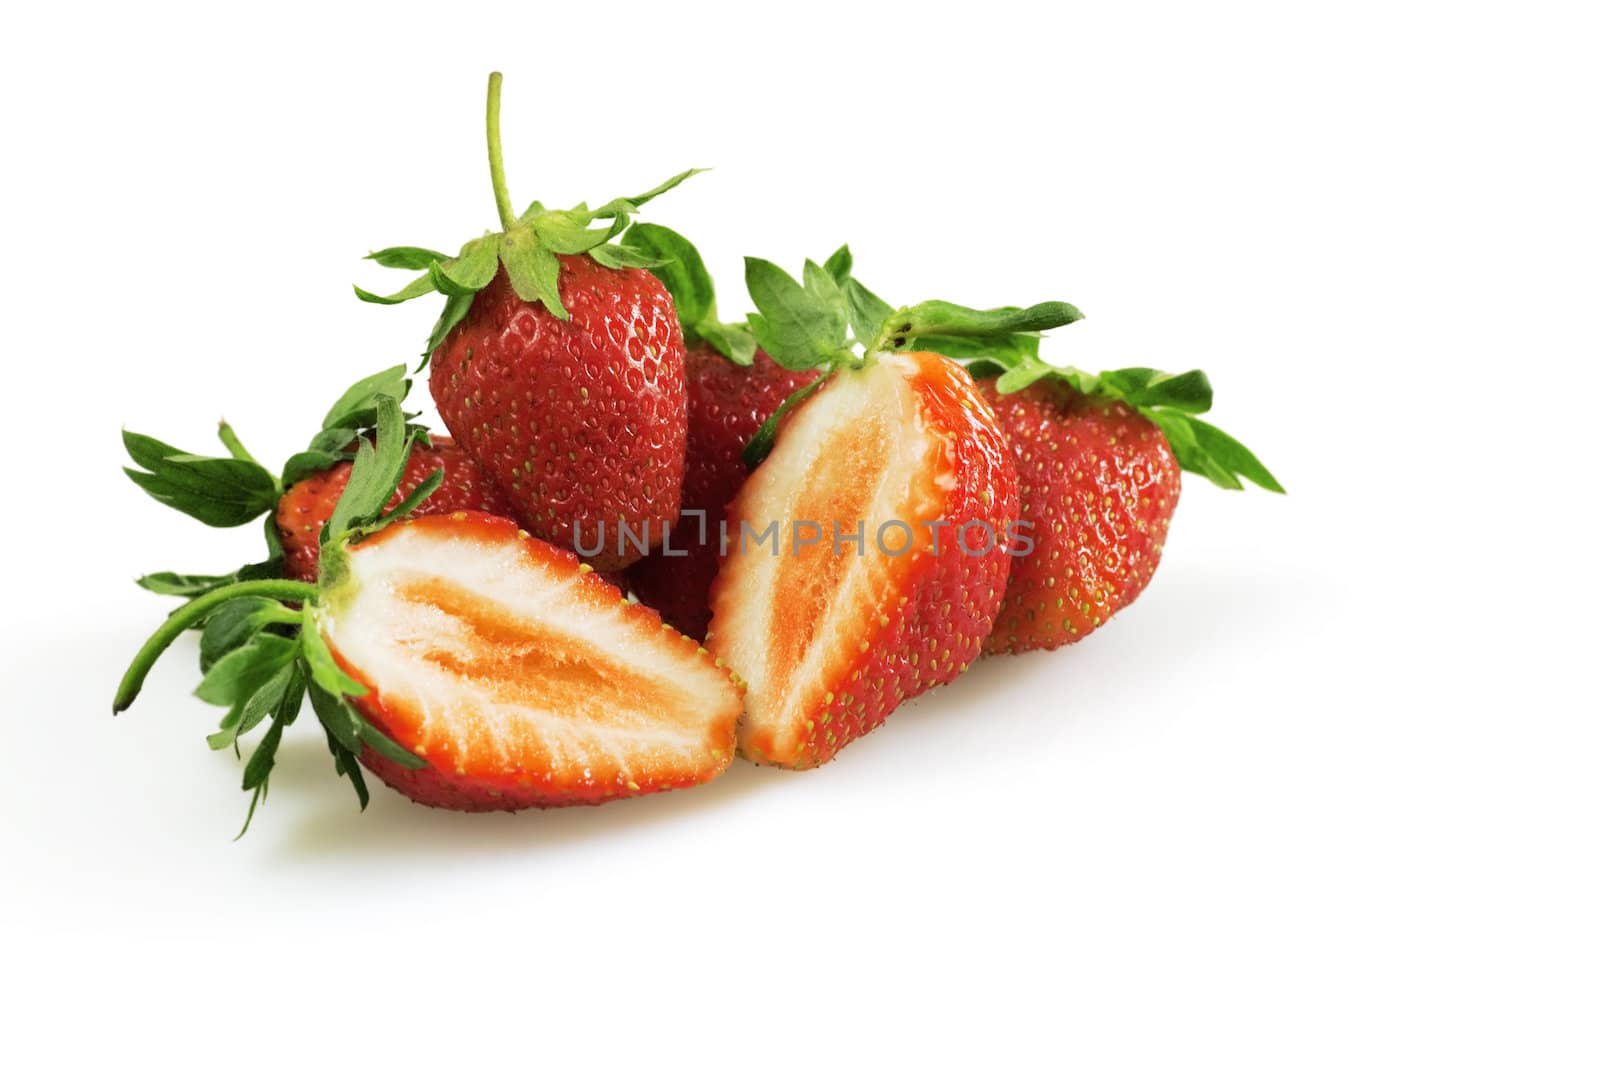 juicy ripe strawberries on white background by Serp